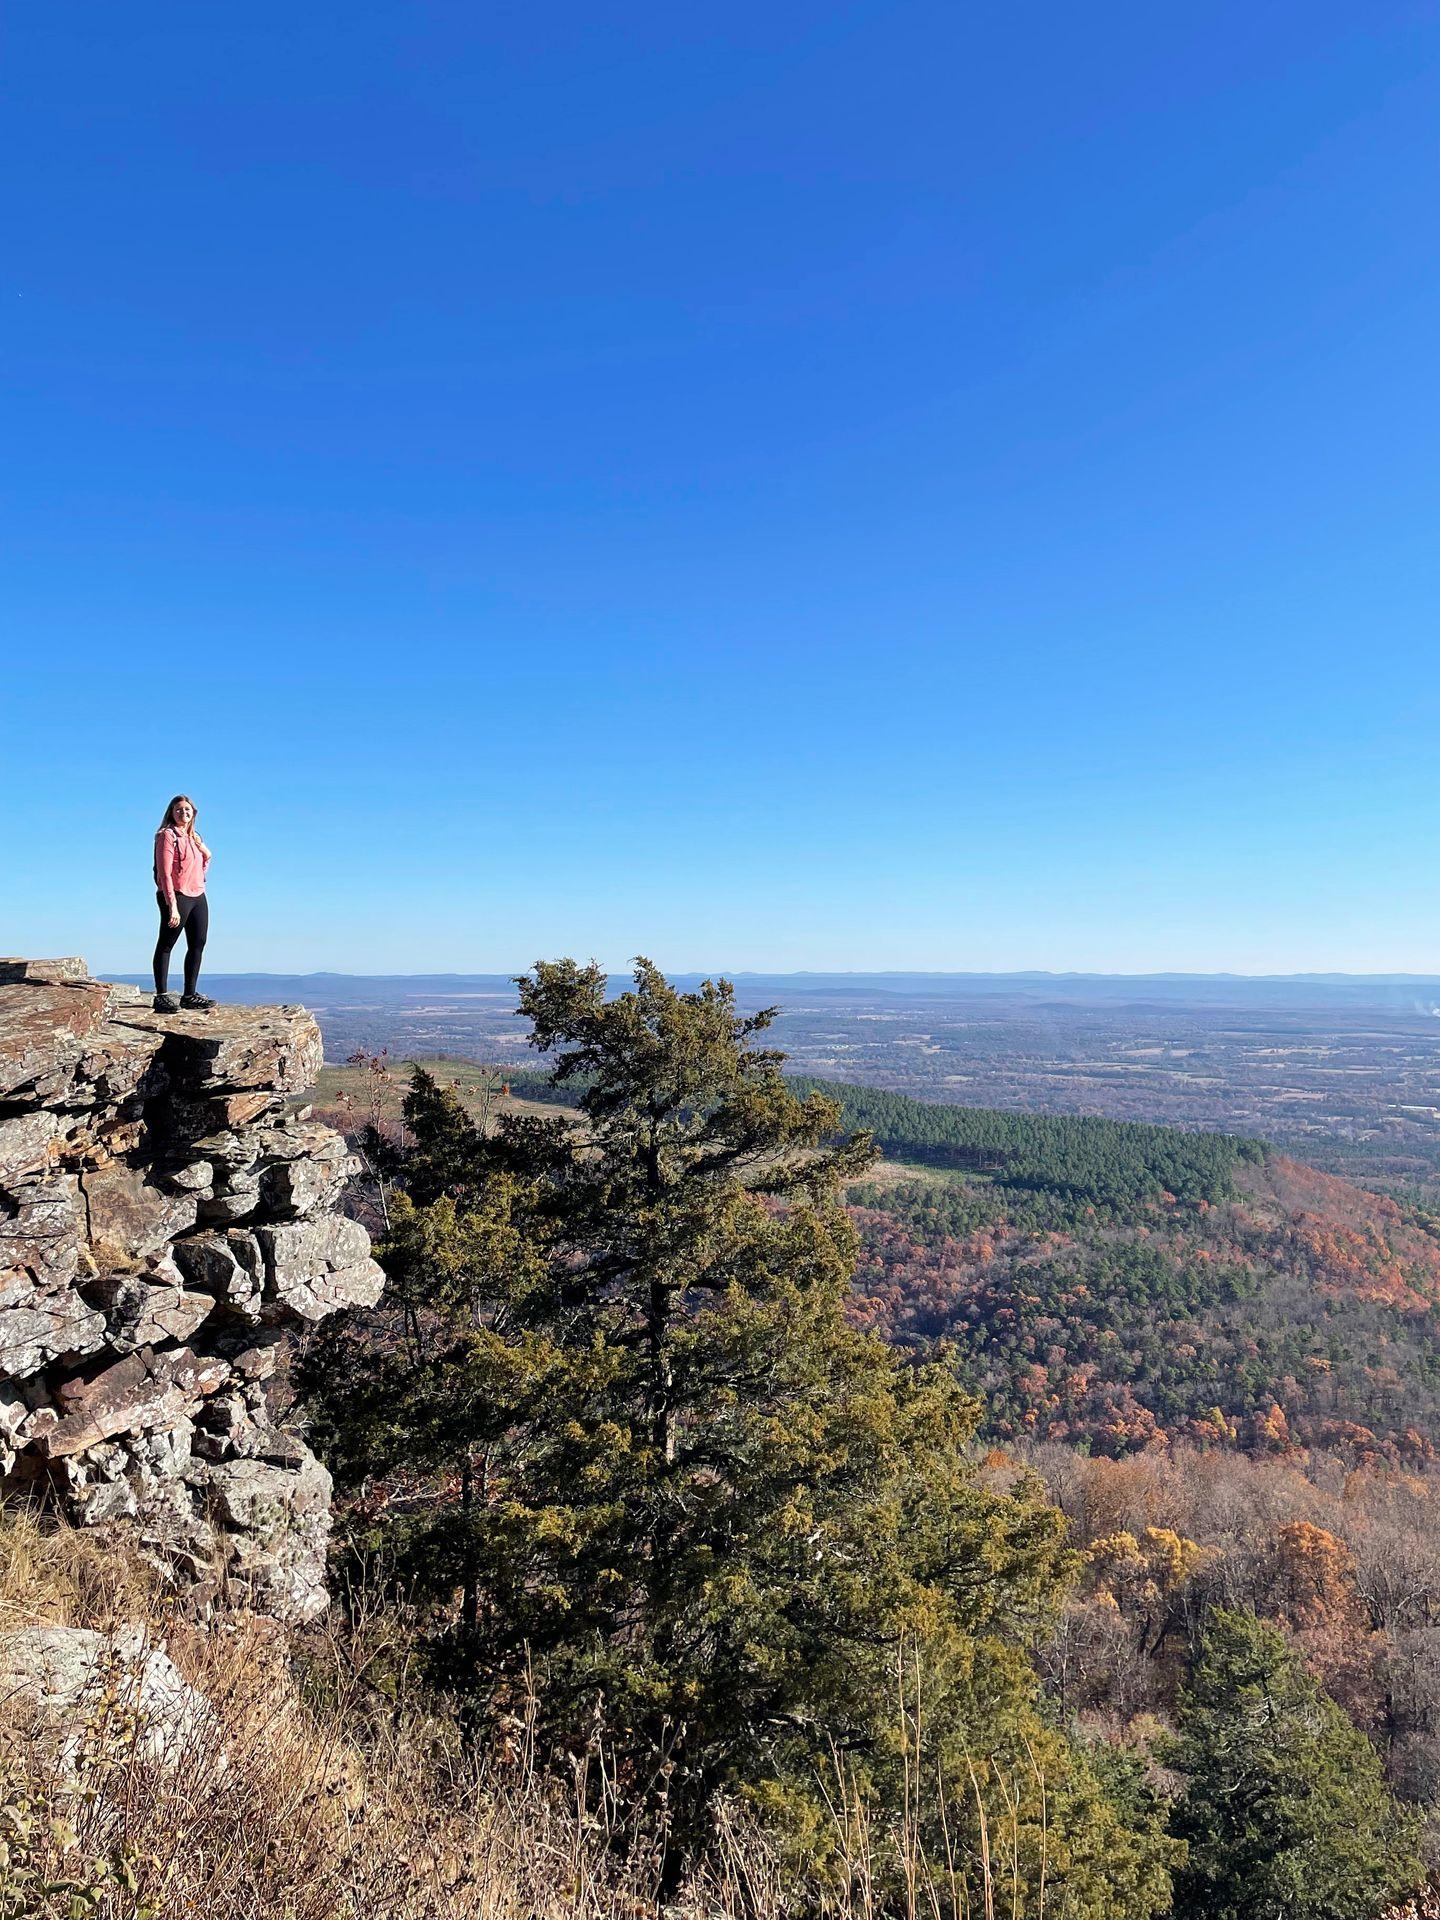 Lydia standing on the edge of rocky cliff with a view of a valley in the background.